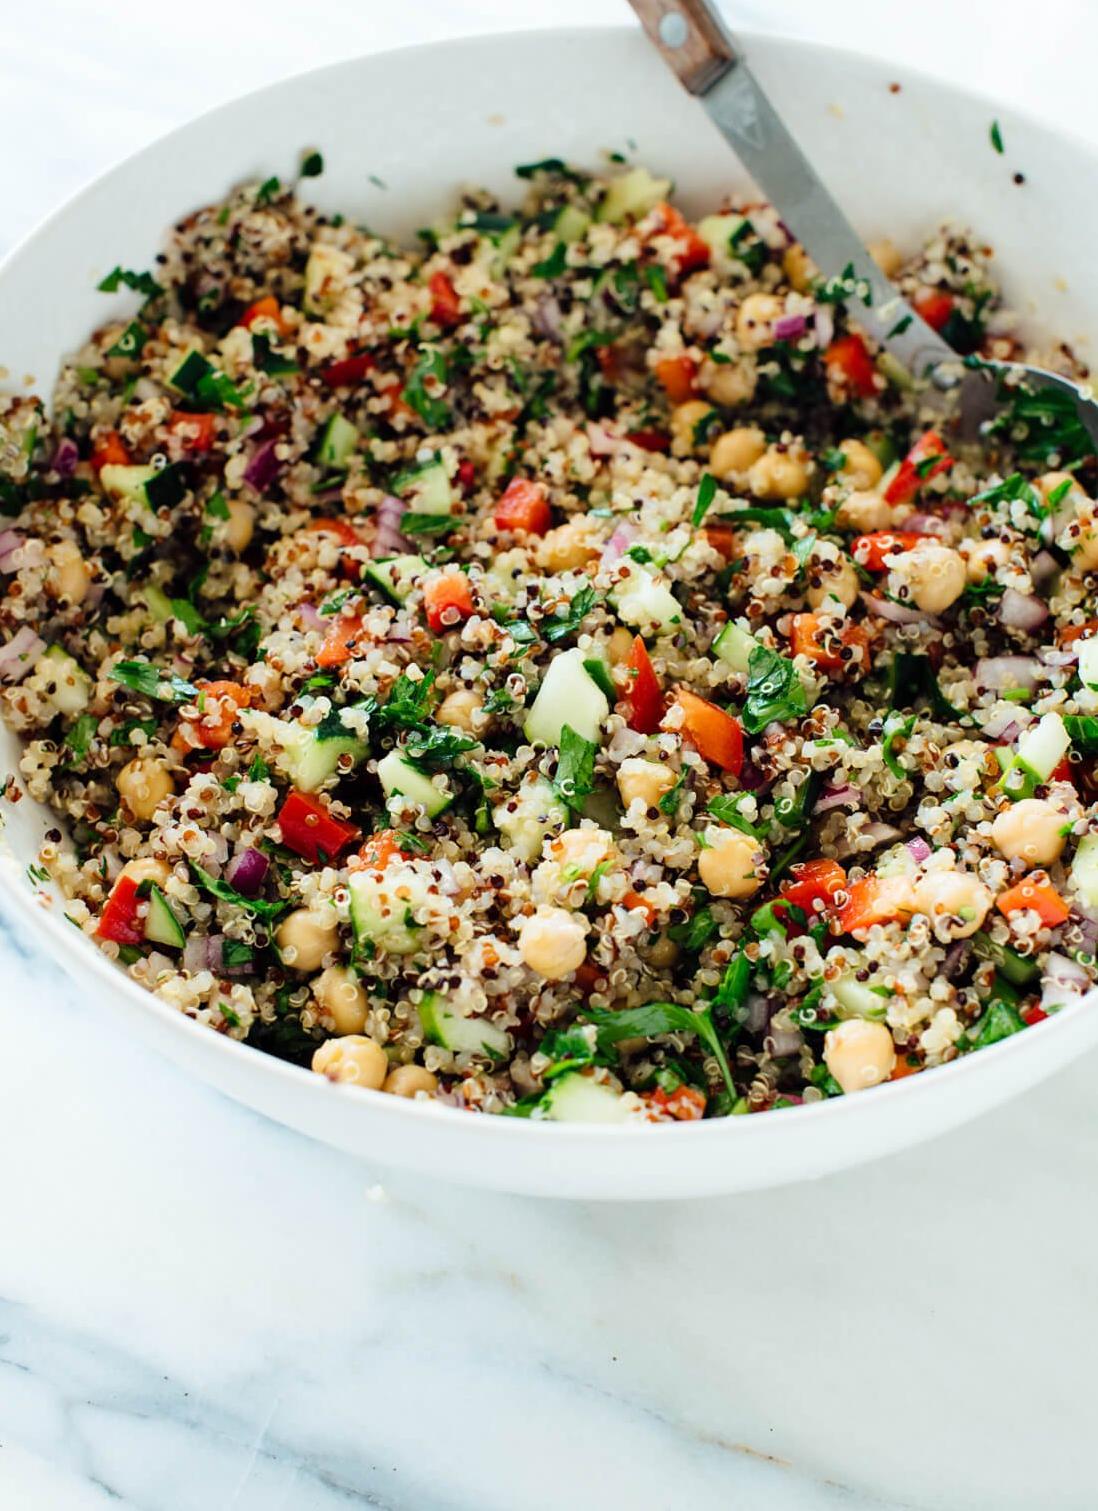  For a dish that's as beautiful as it is flavorful, this quinoa salad is the way to go ????